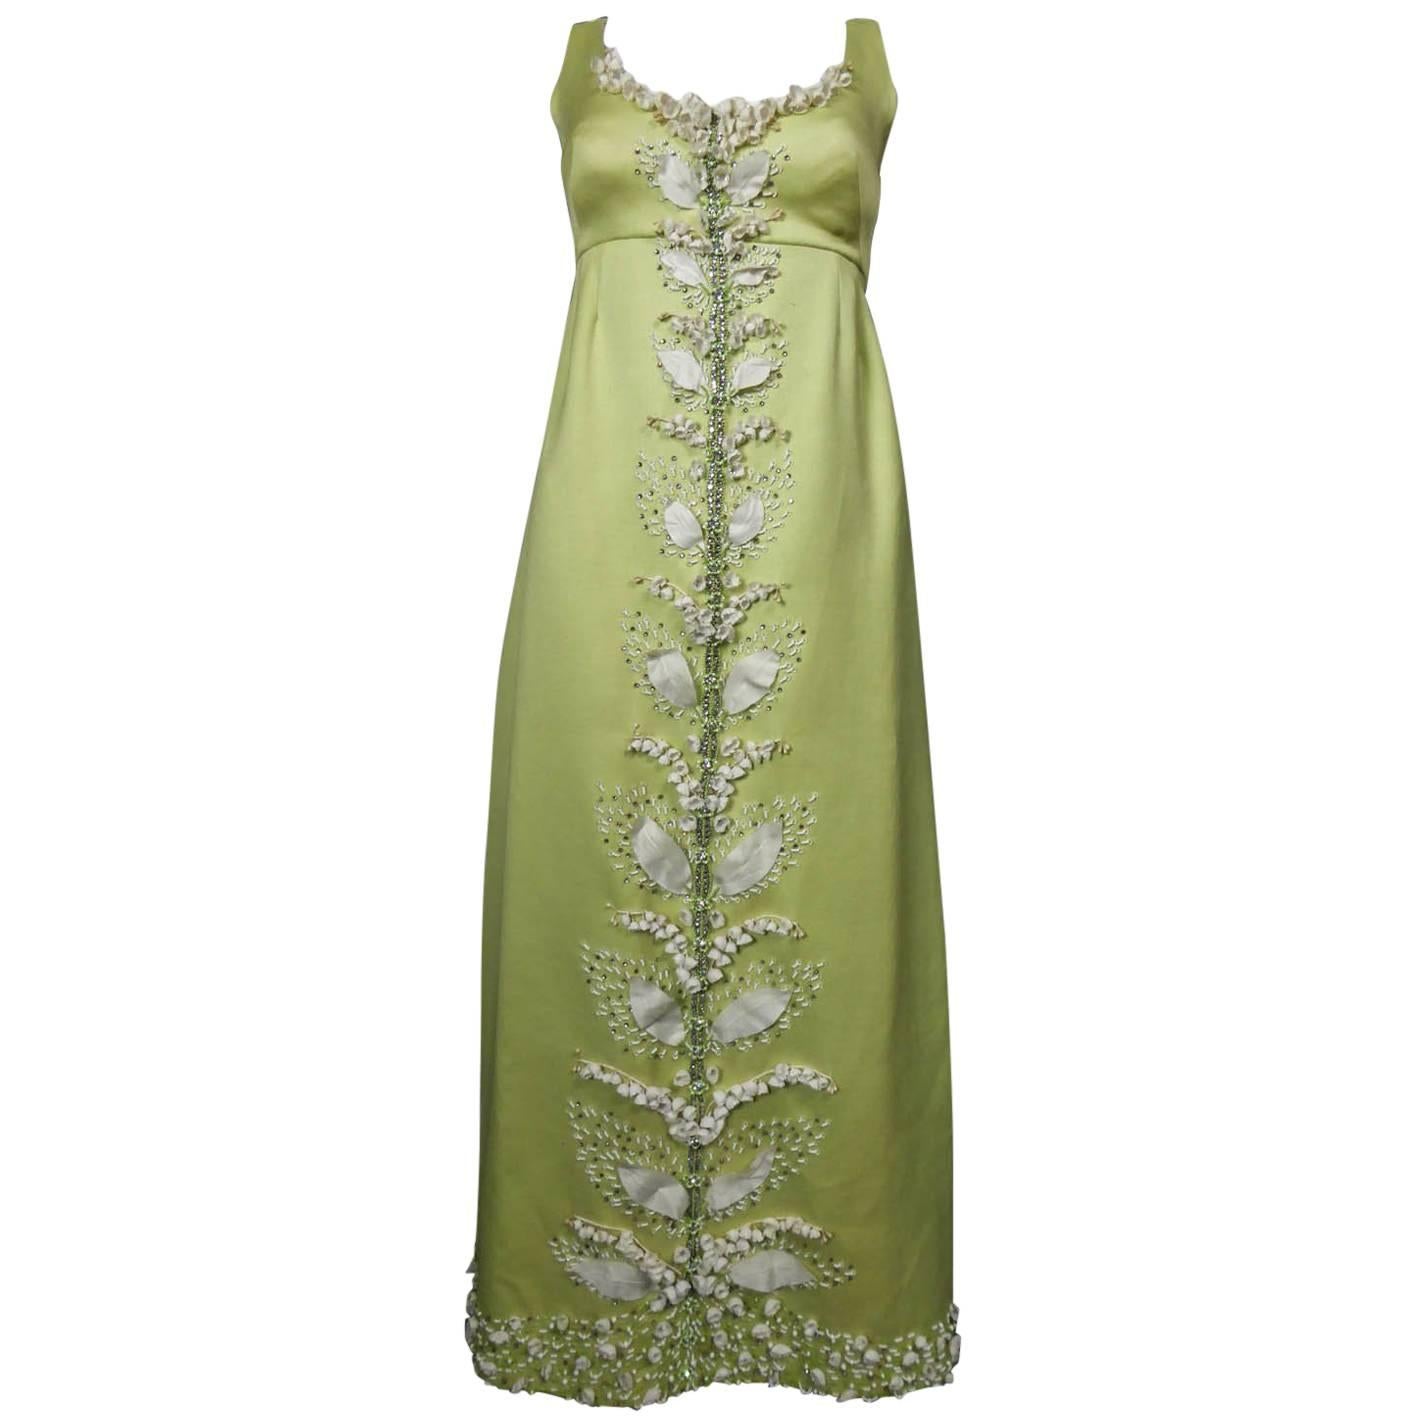 Gazar Italy evening dress embroidered with lily of the valley, circa 1965